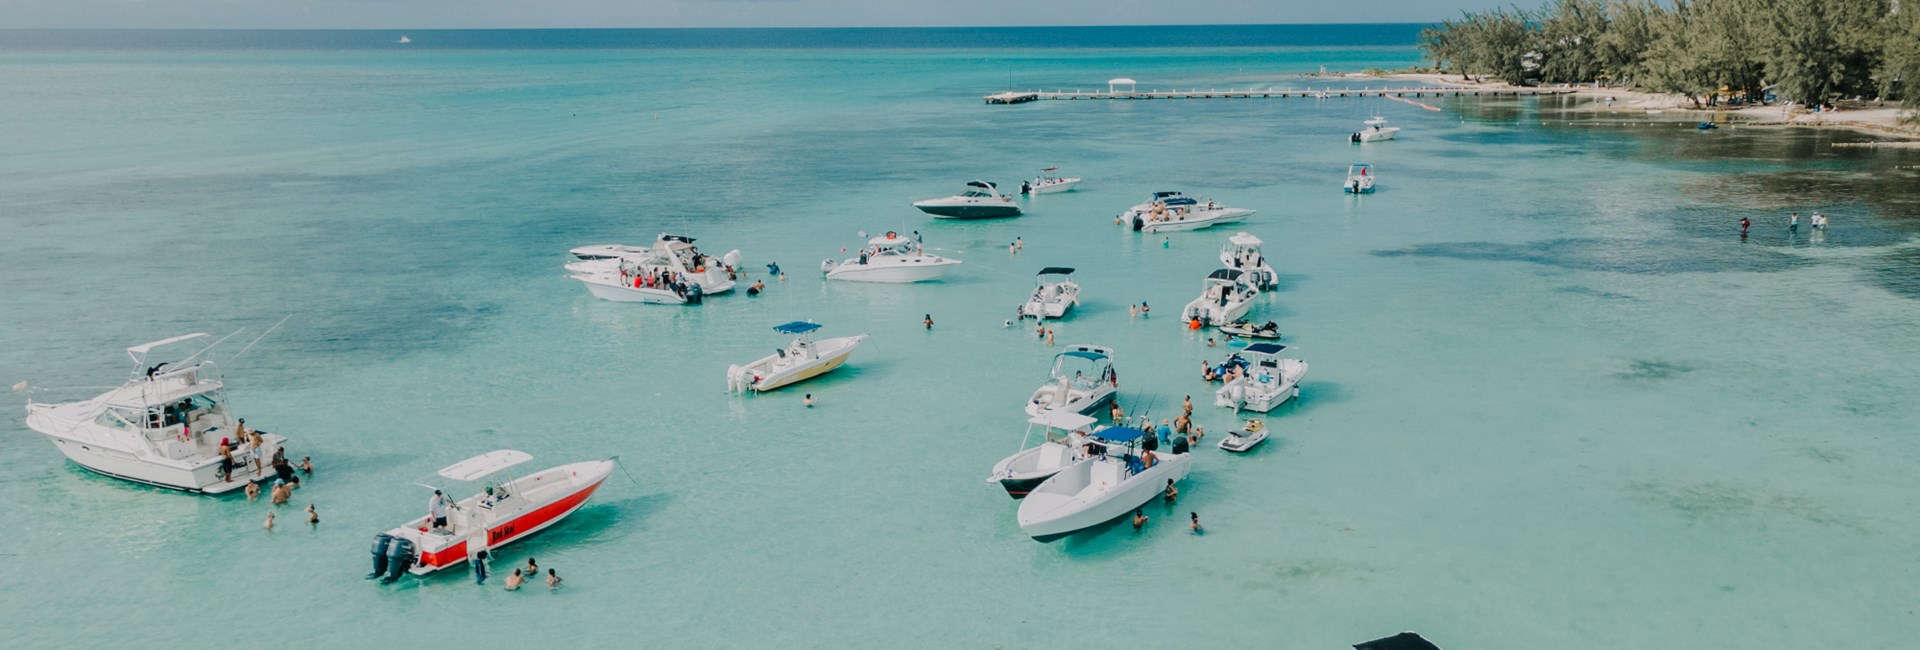 Boats anchored in blue waters with island in background - Cayman Islands 